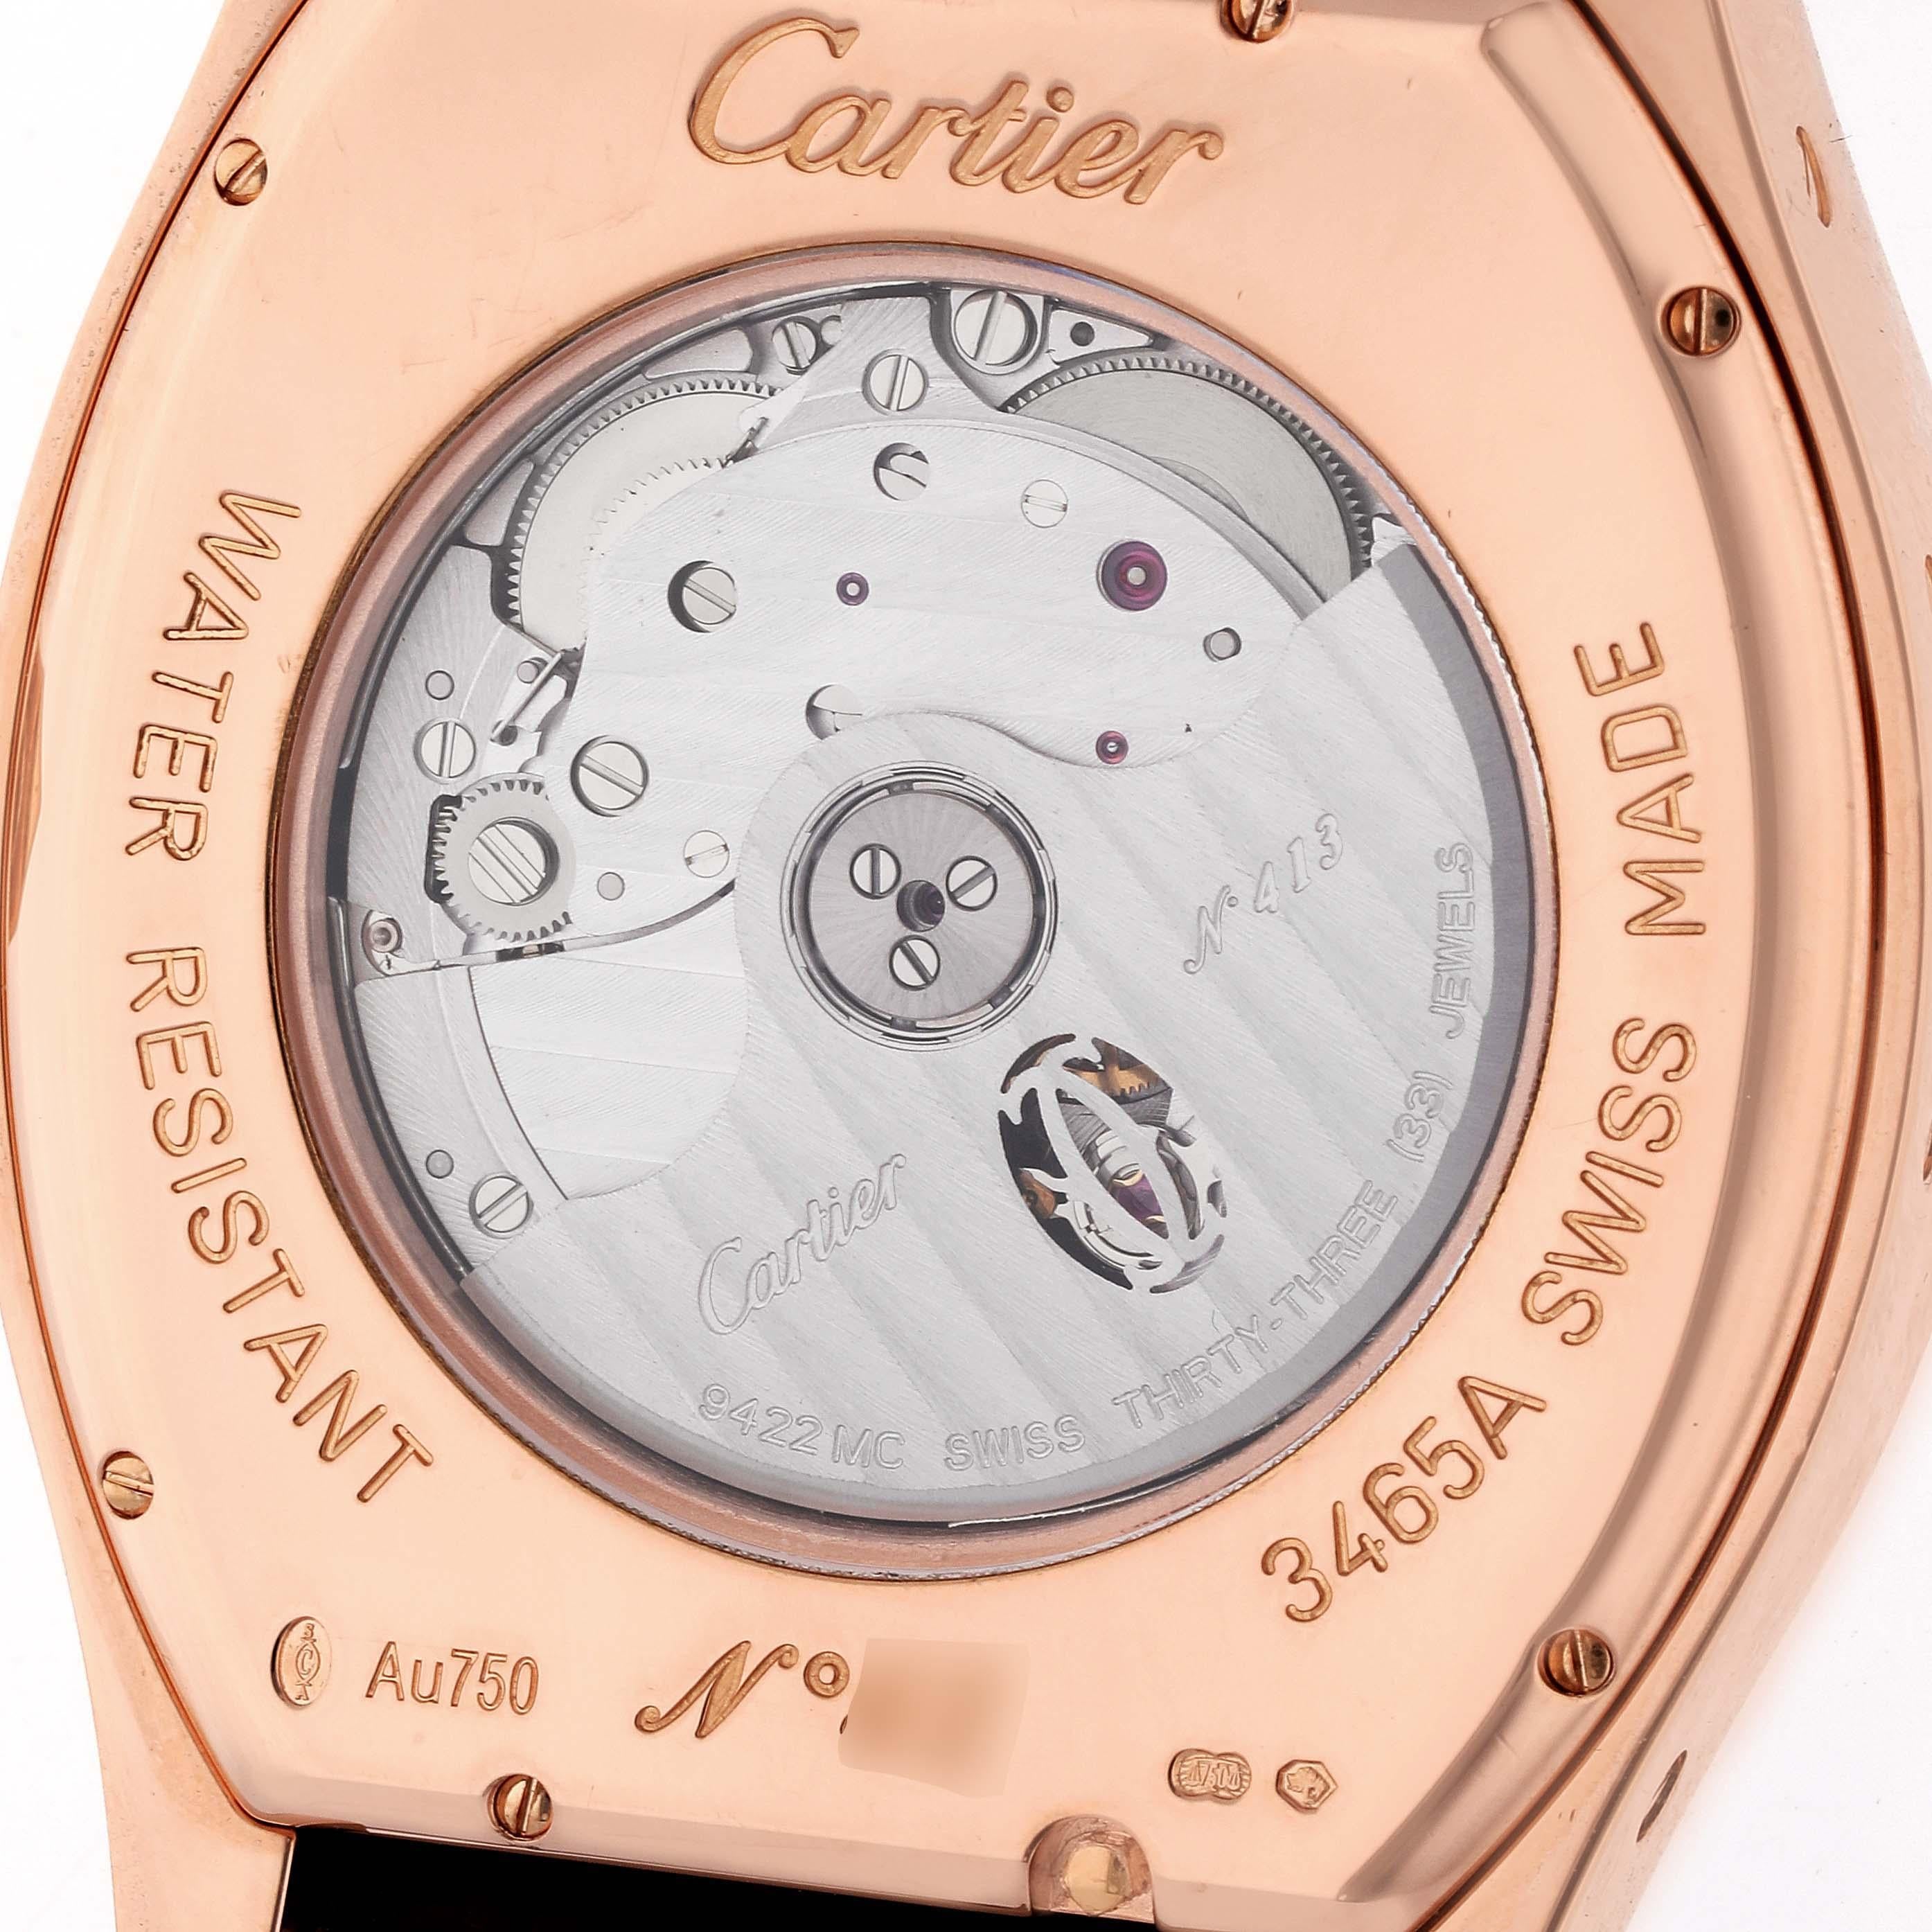 Cartier Tortue Perpetual Calendar Automatic Rose Gold Mens Watch W1580045 For Sale 3